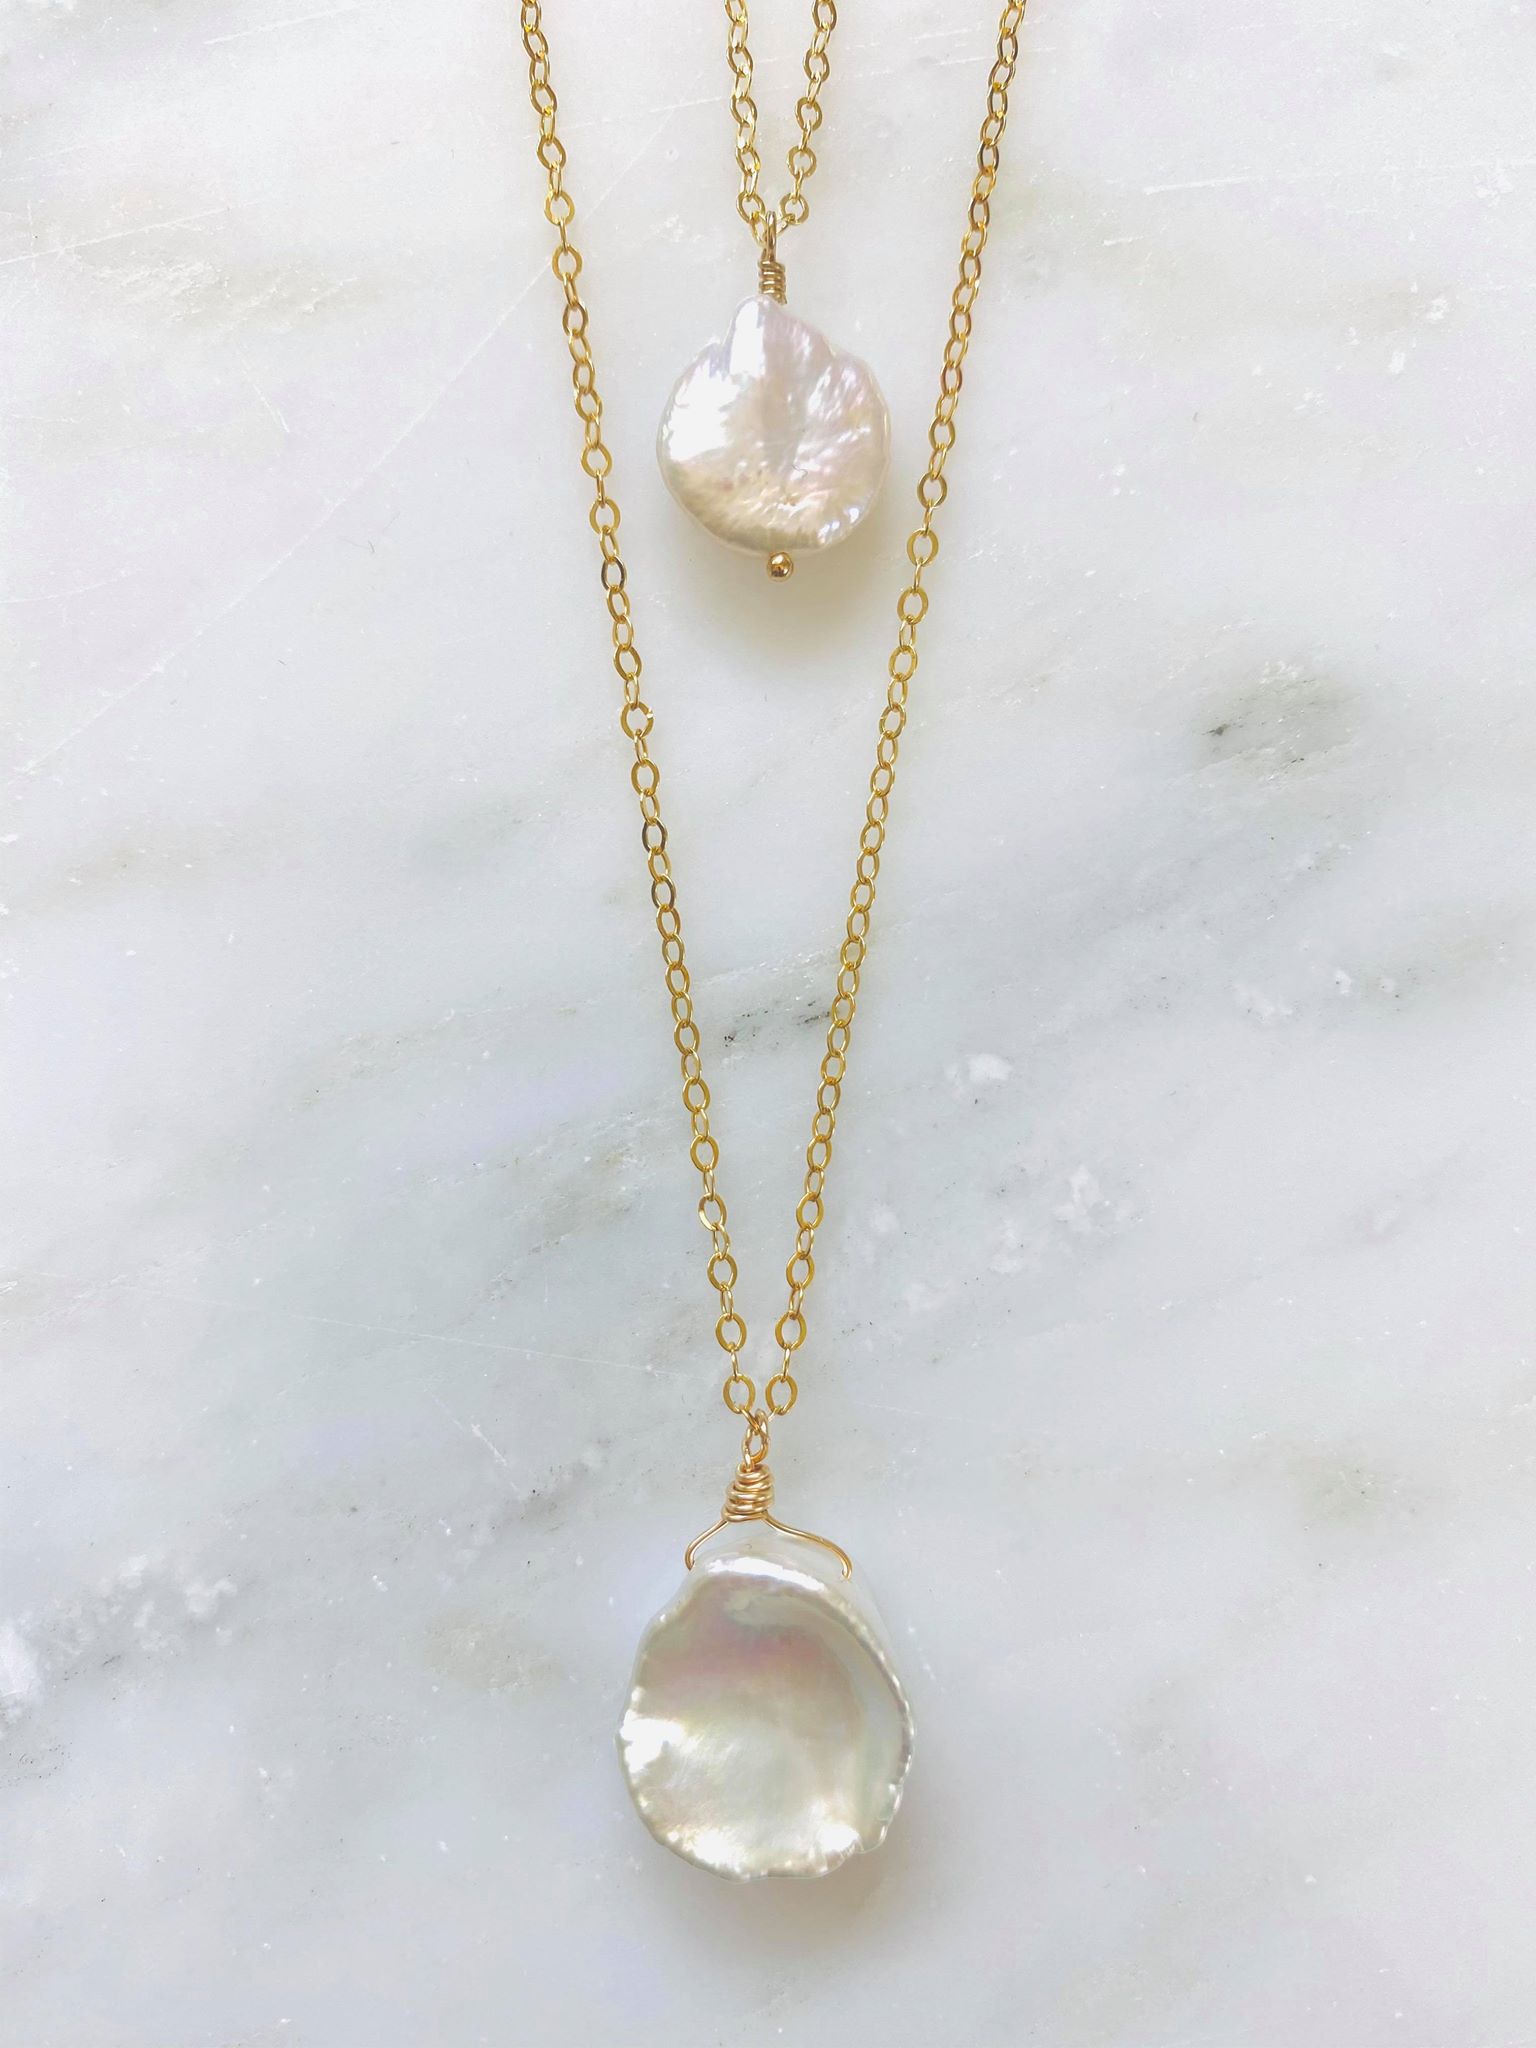 Gold and Mother of Pearl Necklace Set - Chelsea Bond